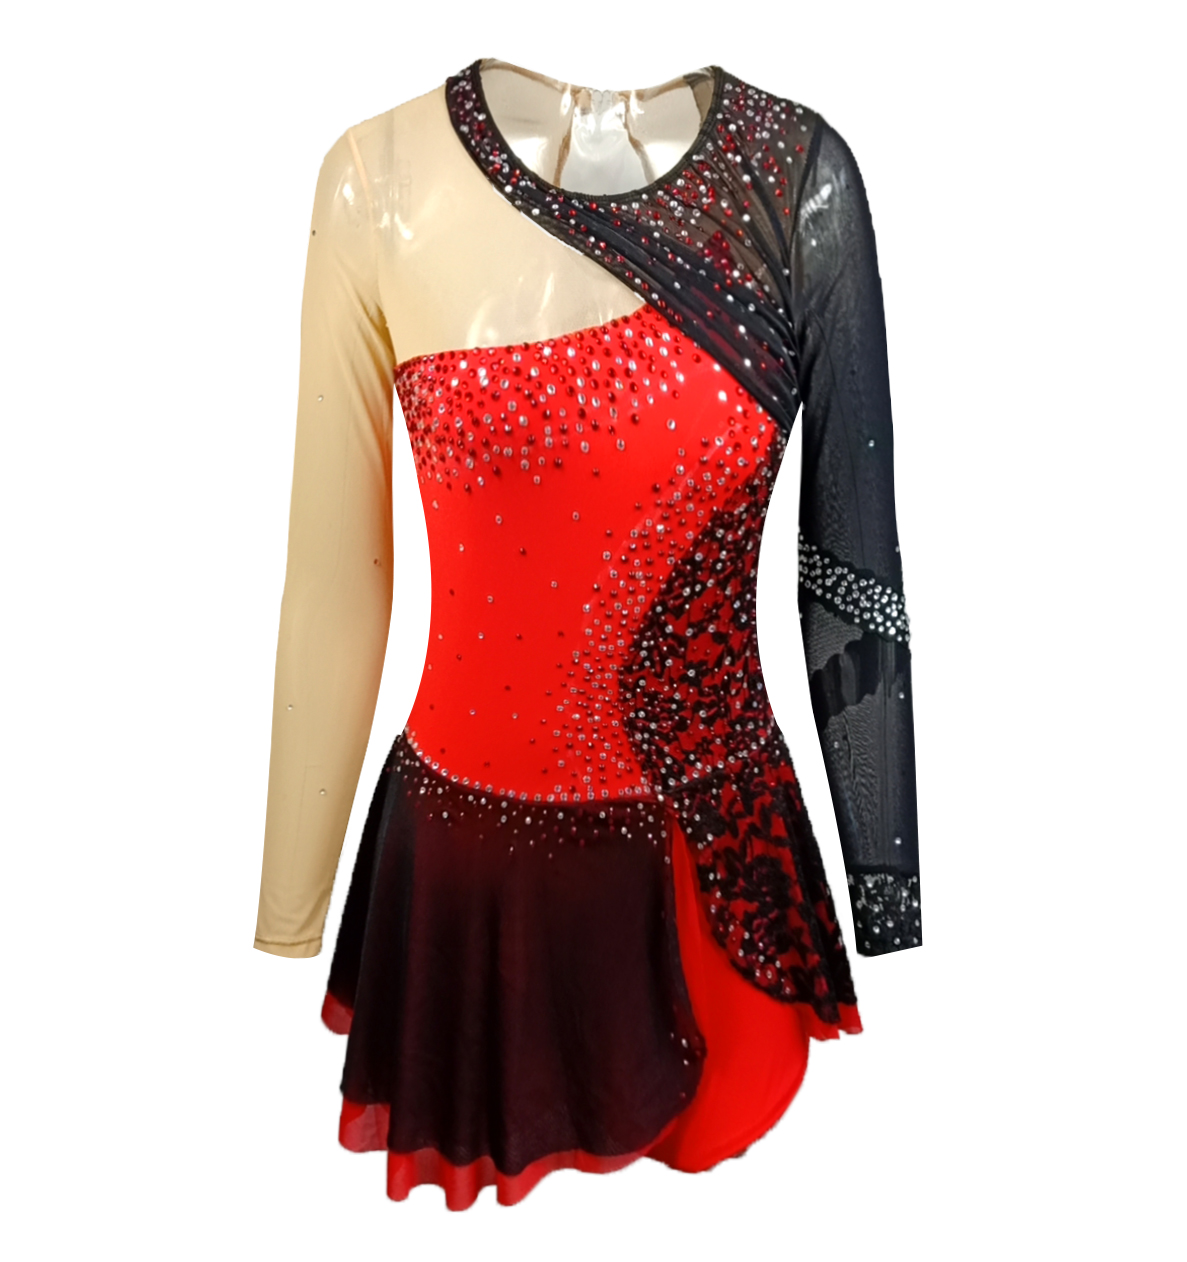 Ice Figure Skating Dress Women's Girls' Black Lace Quality Crystals High Elasticity Training Competition Skating Wear Solid Colored Classic / Rhinestone / Kids Performance Wear